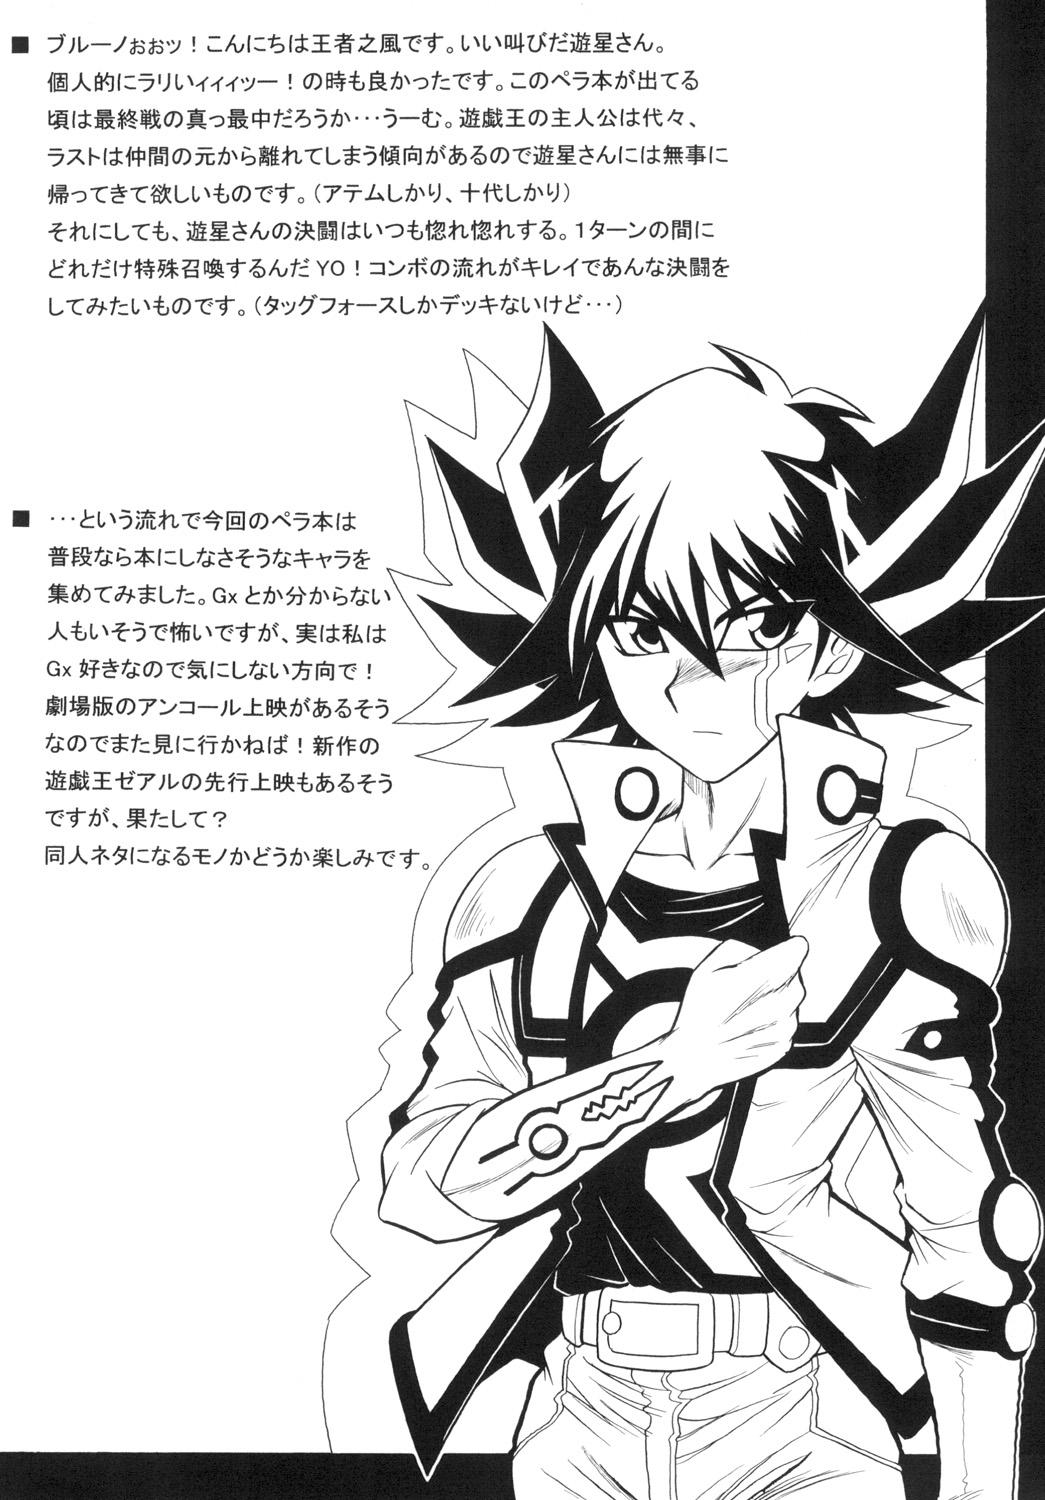 Milk CLEAR MIND - Yu gi oh 5ds Guy - Page 2